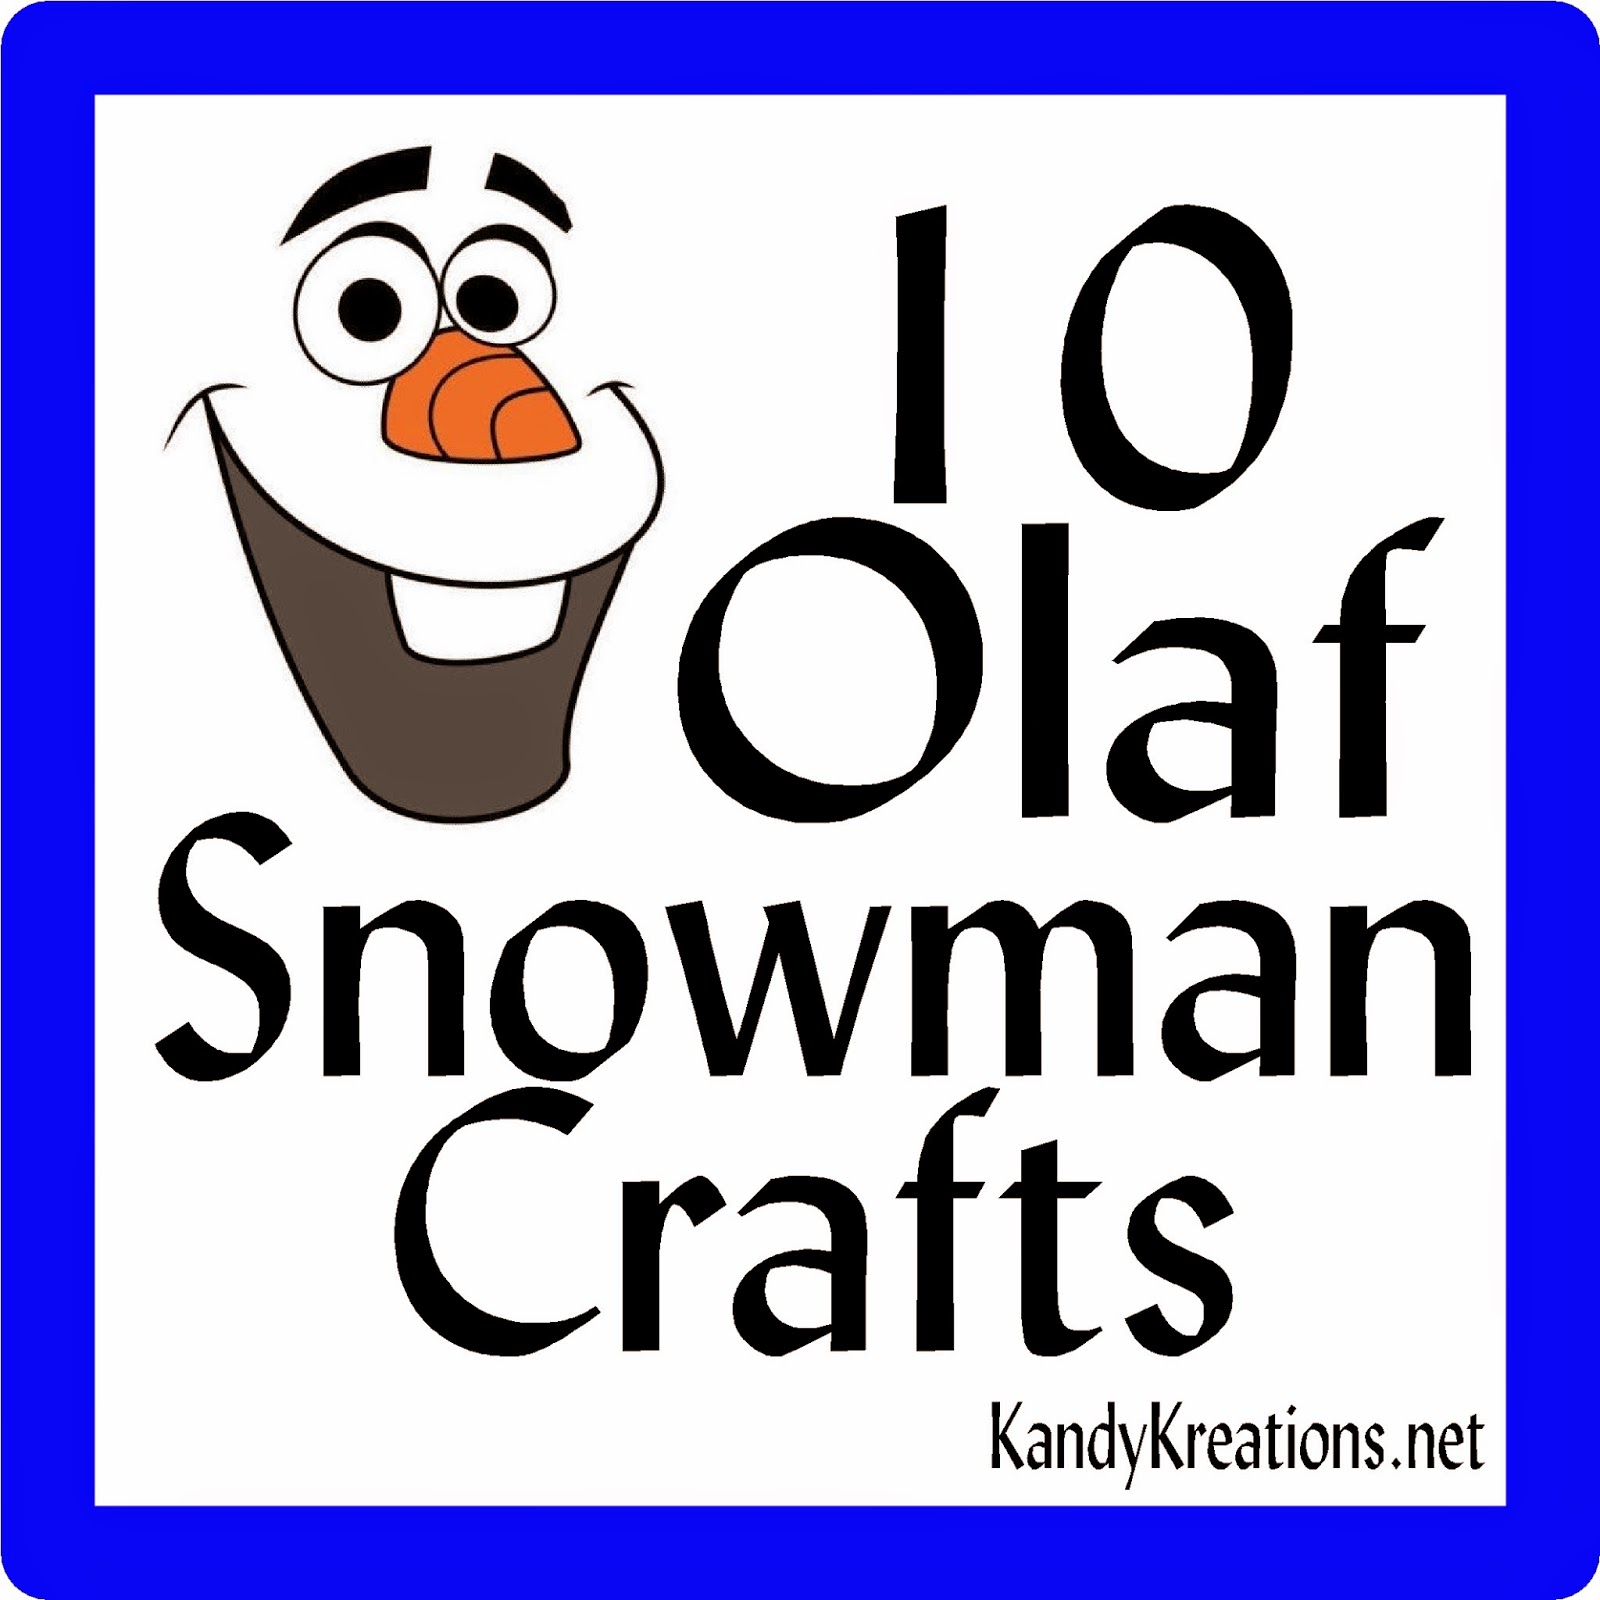 10 Olaf the Snowman Crafts